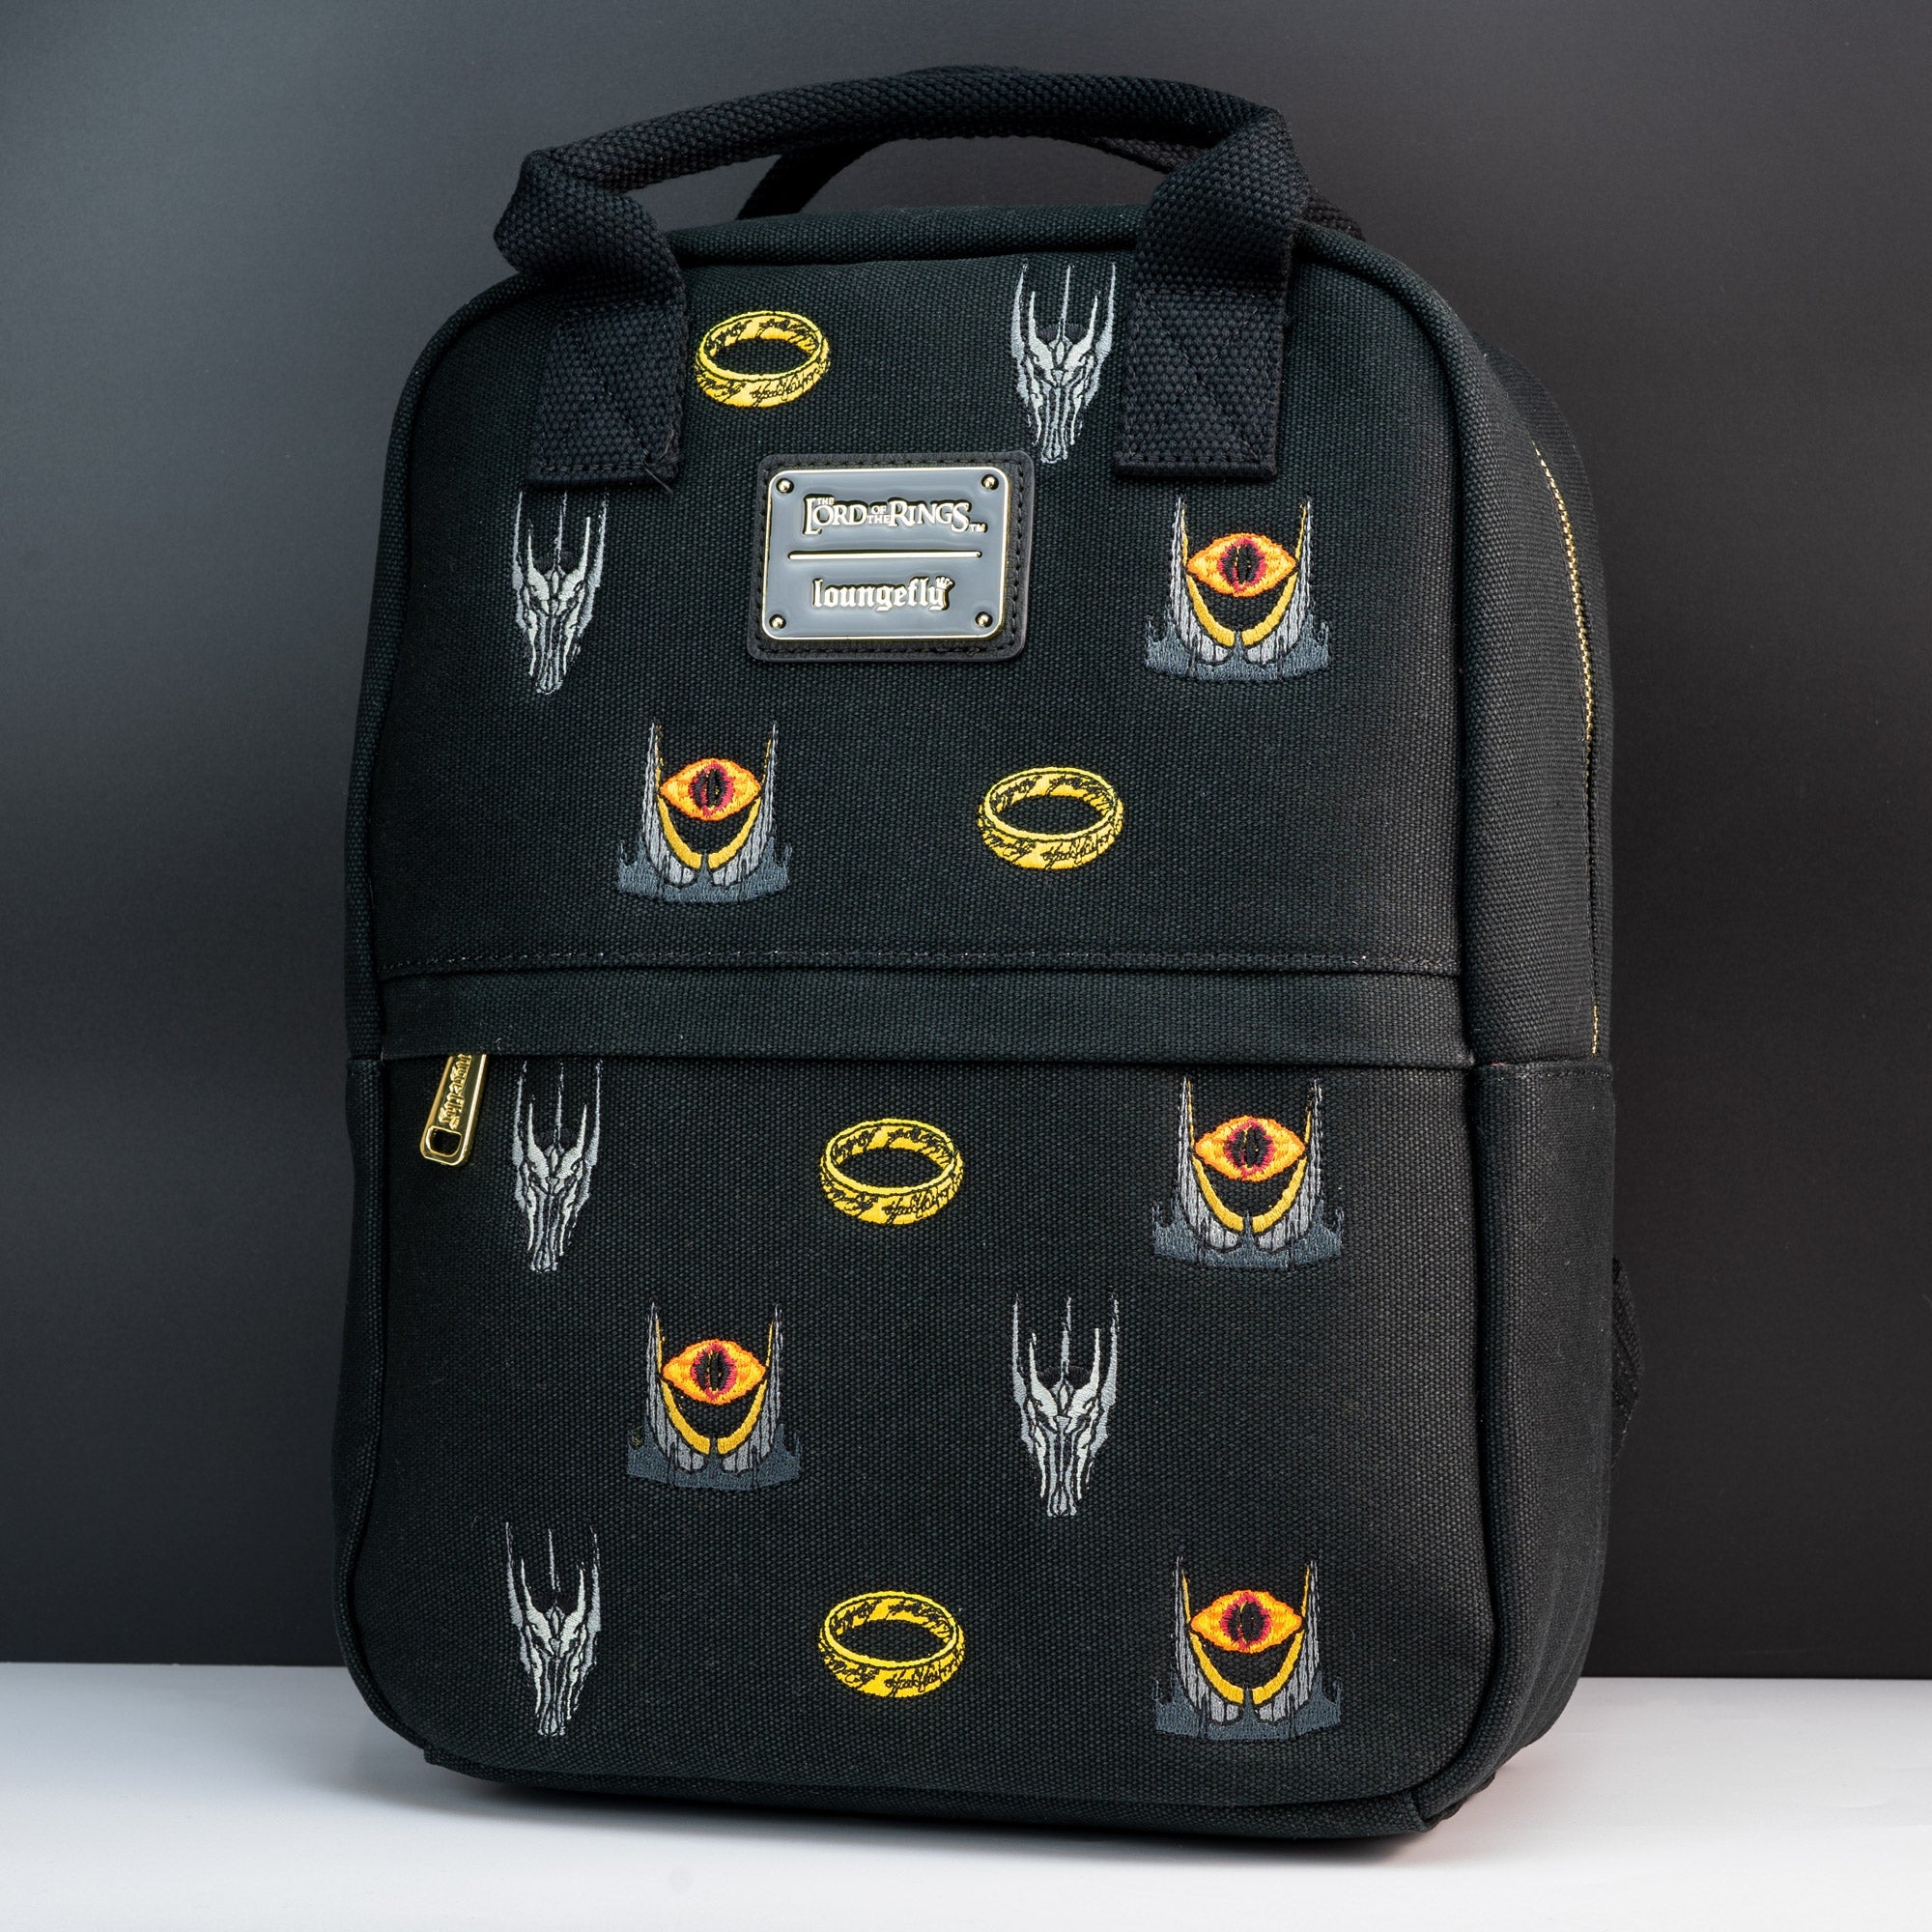 Loungefly x The Lord of the Rings Sauron Canvas Backpack - GeekCore